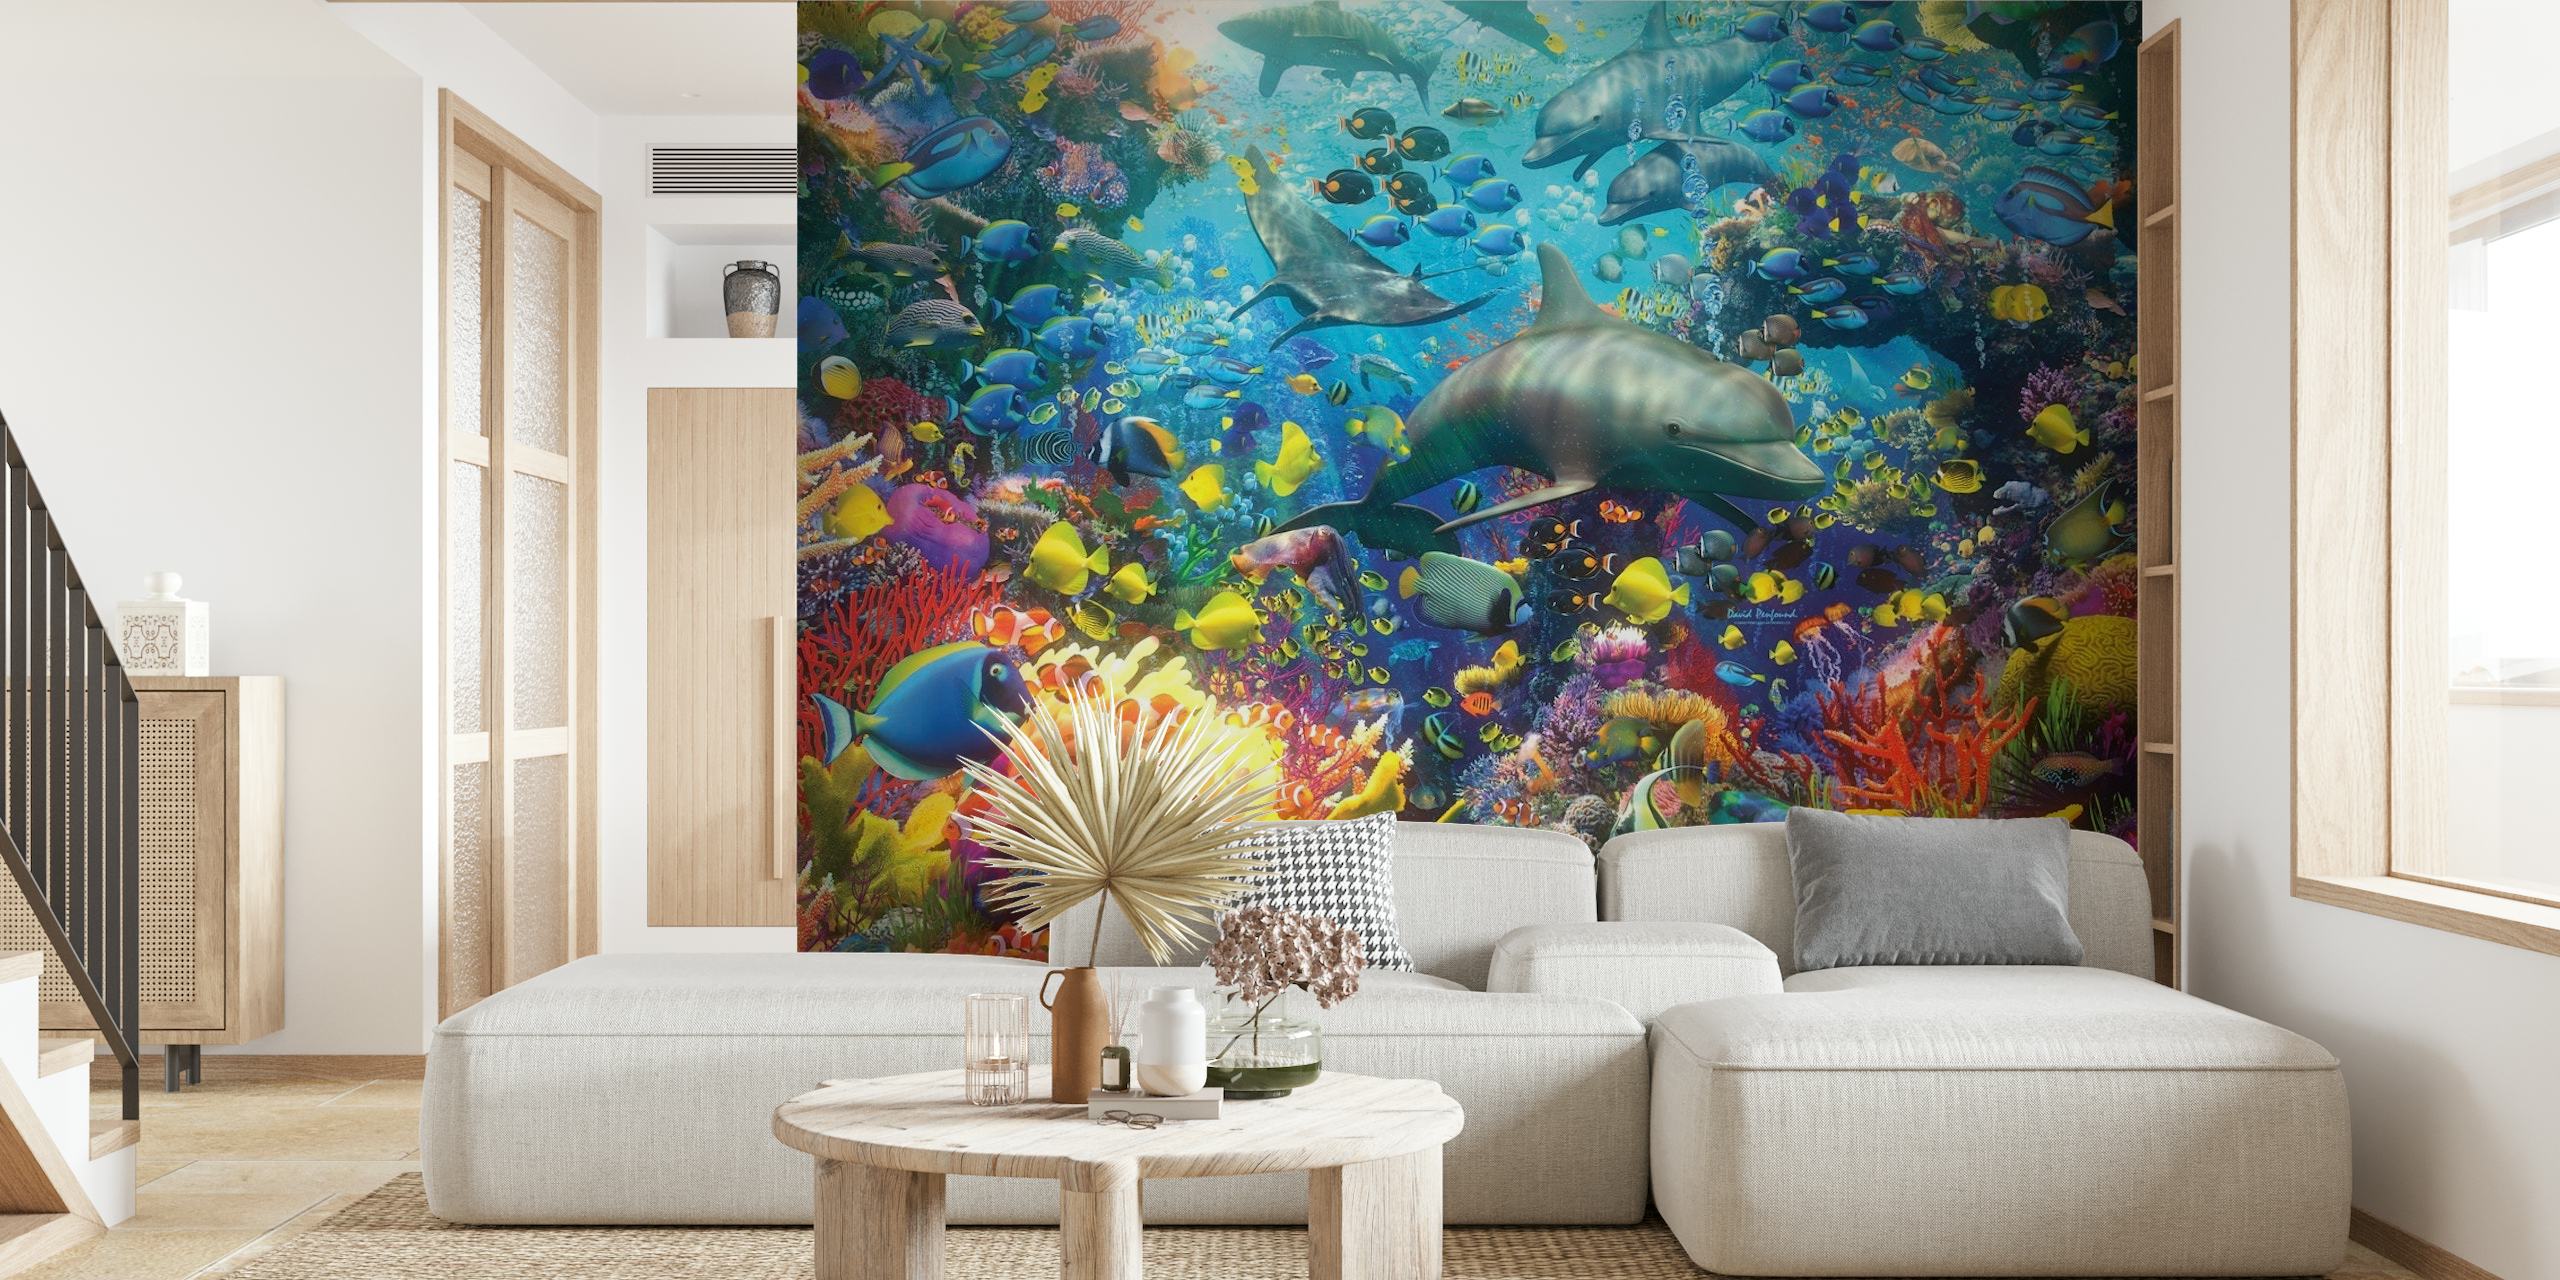 Colorful underwater scene with coral reef, tropical fish, and a shark, for wall mural 'The Red Sea'.